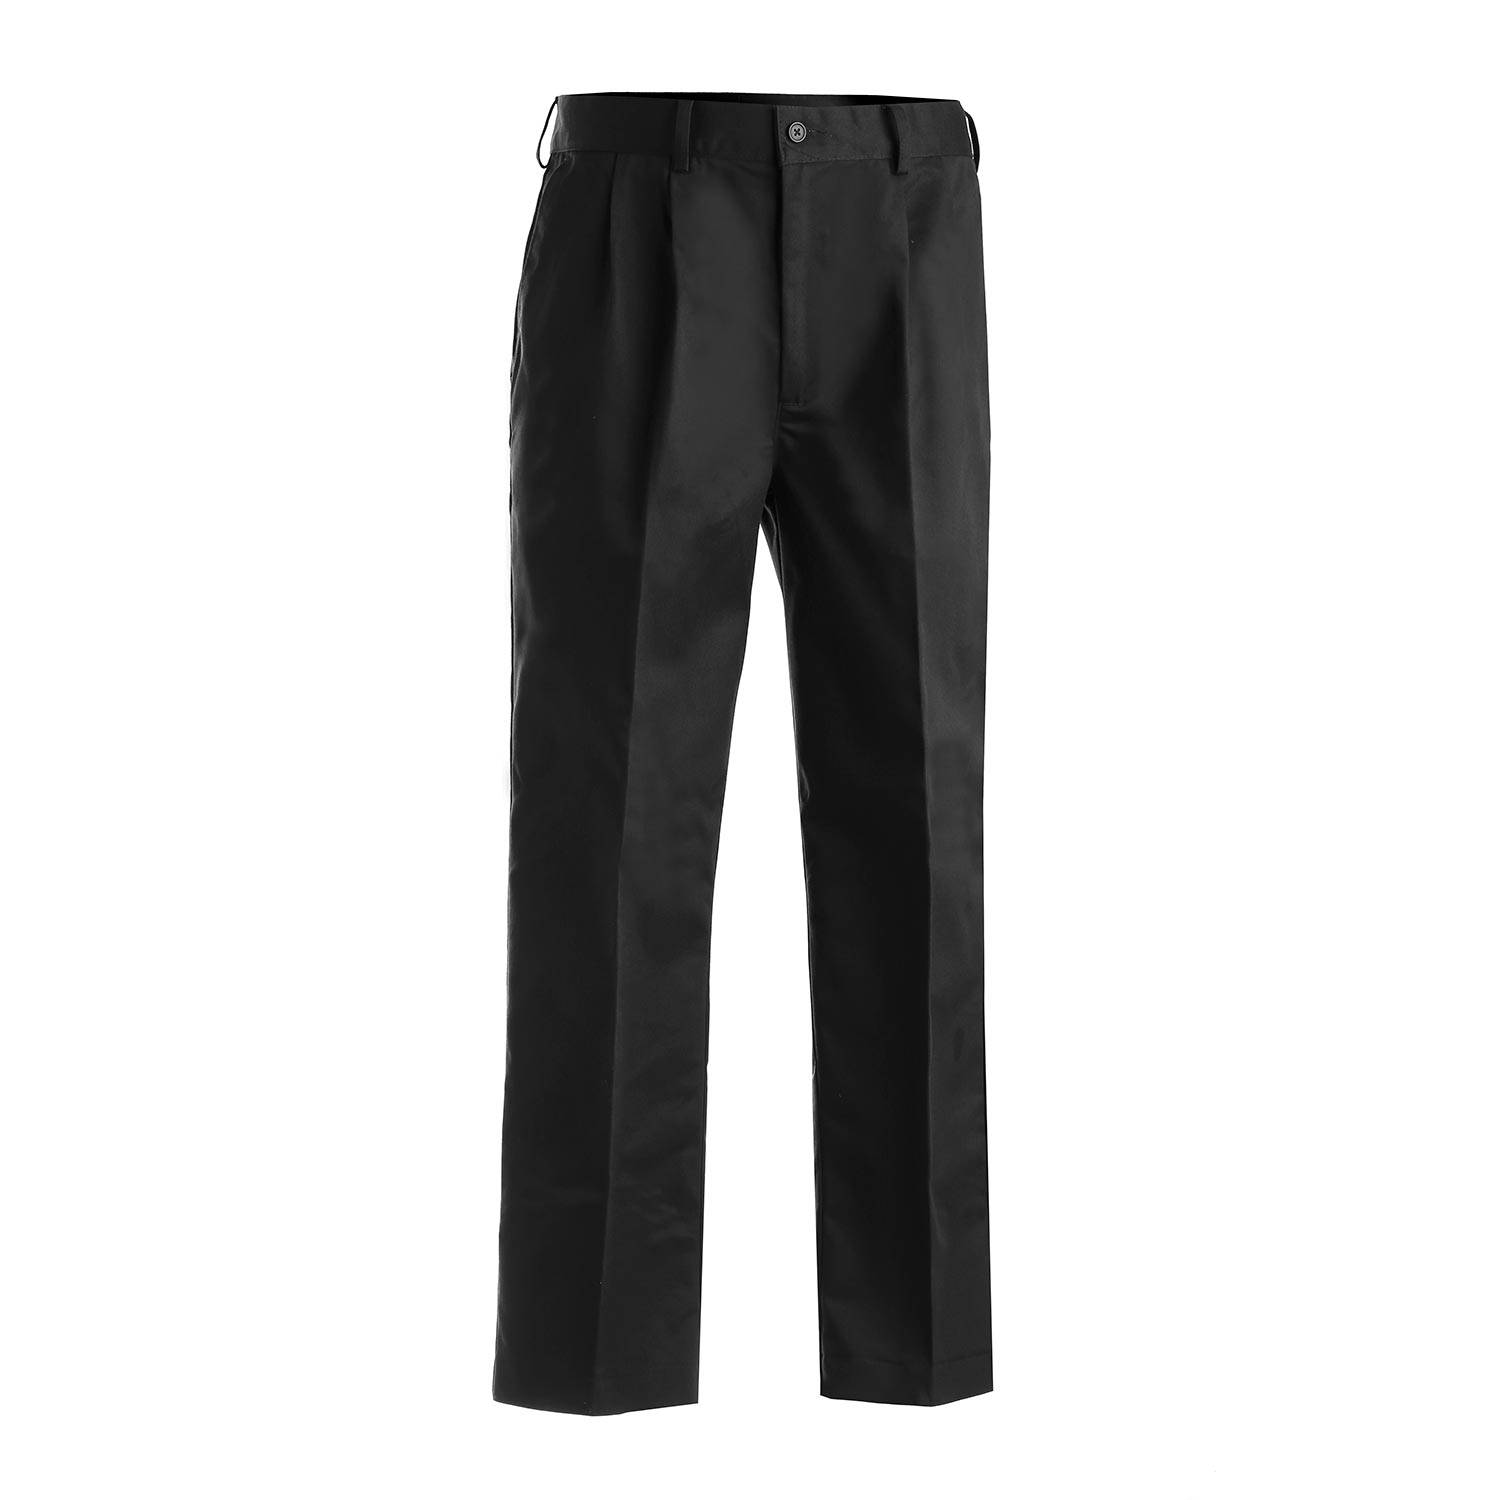 EDWARDS MEN'S CHINO FRONT PLEATED TROUSERS